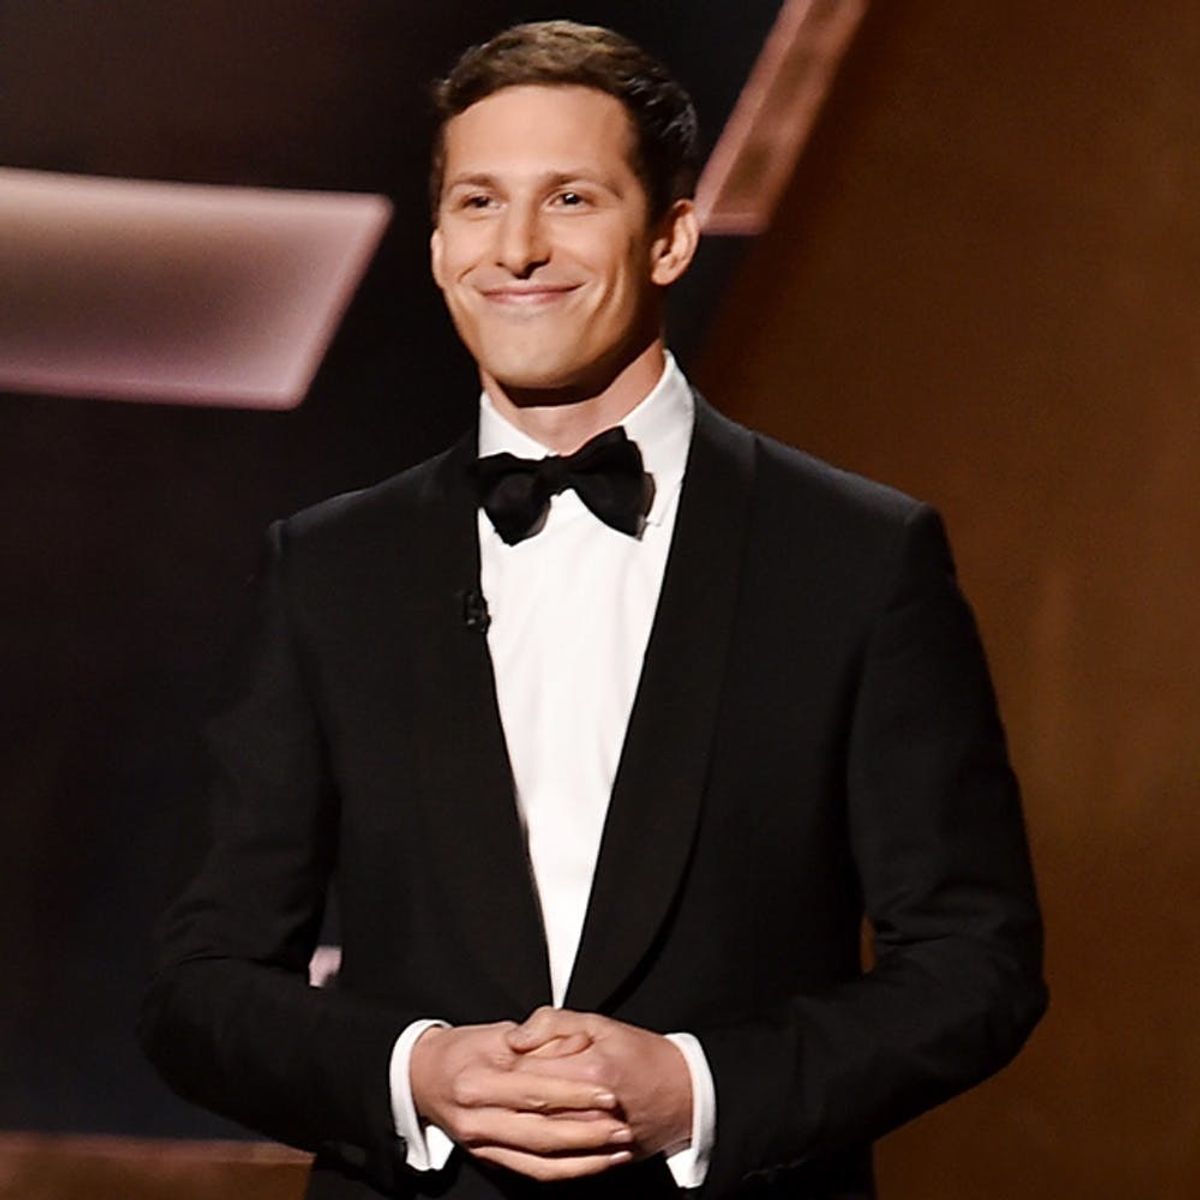 Andy Samberg Gave Out a Legit HBO Now Password at the Emmys